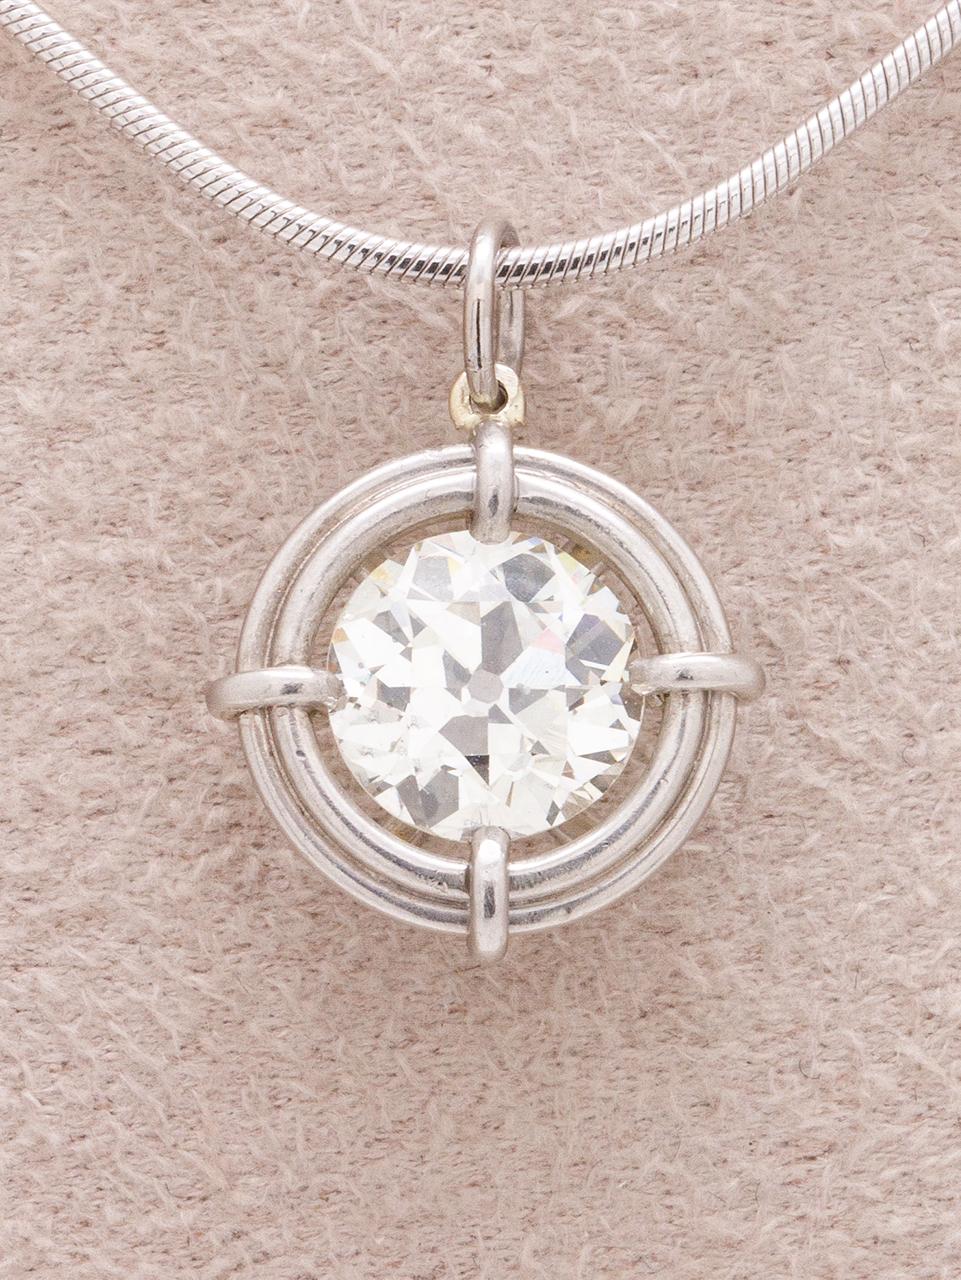 Stunning custom diamond solitaire pendant necklace set in platinum featuring a bright and lively 1.41ct Old European Cut, J-VS2. The simple, modern pendant is complimented by a 16 inch long contemporary 1mm platinum snake chain. This piece can be